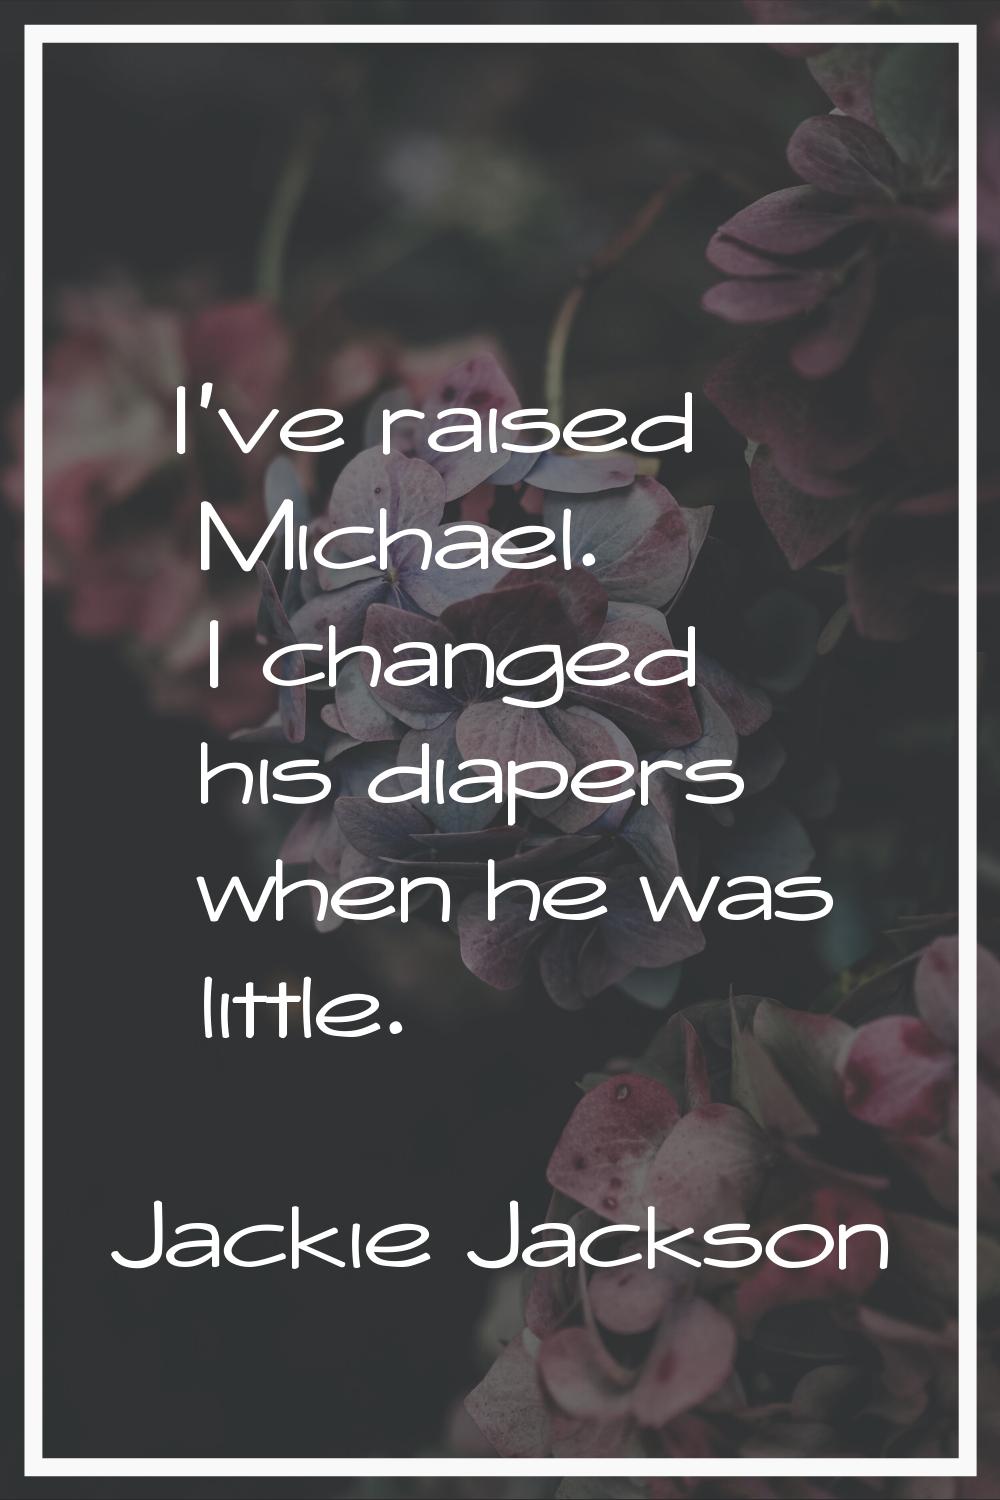 I've raised Michael. I changed his diapers when he was little.